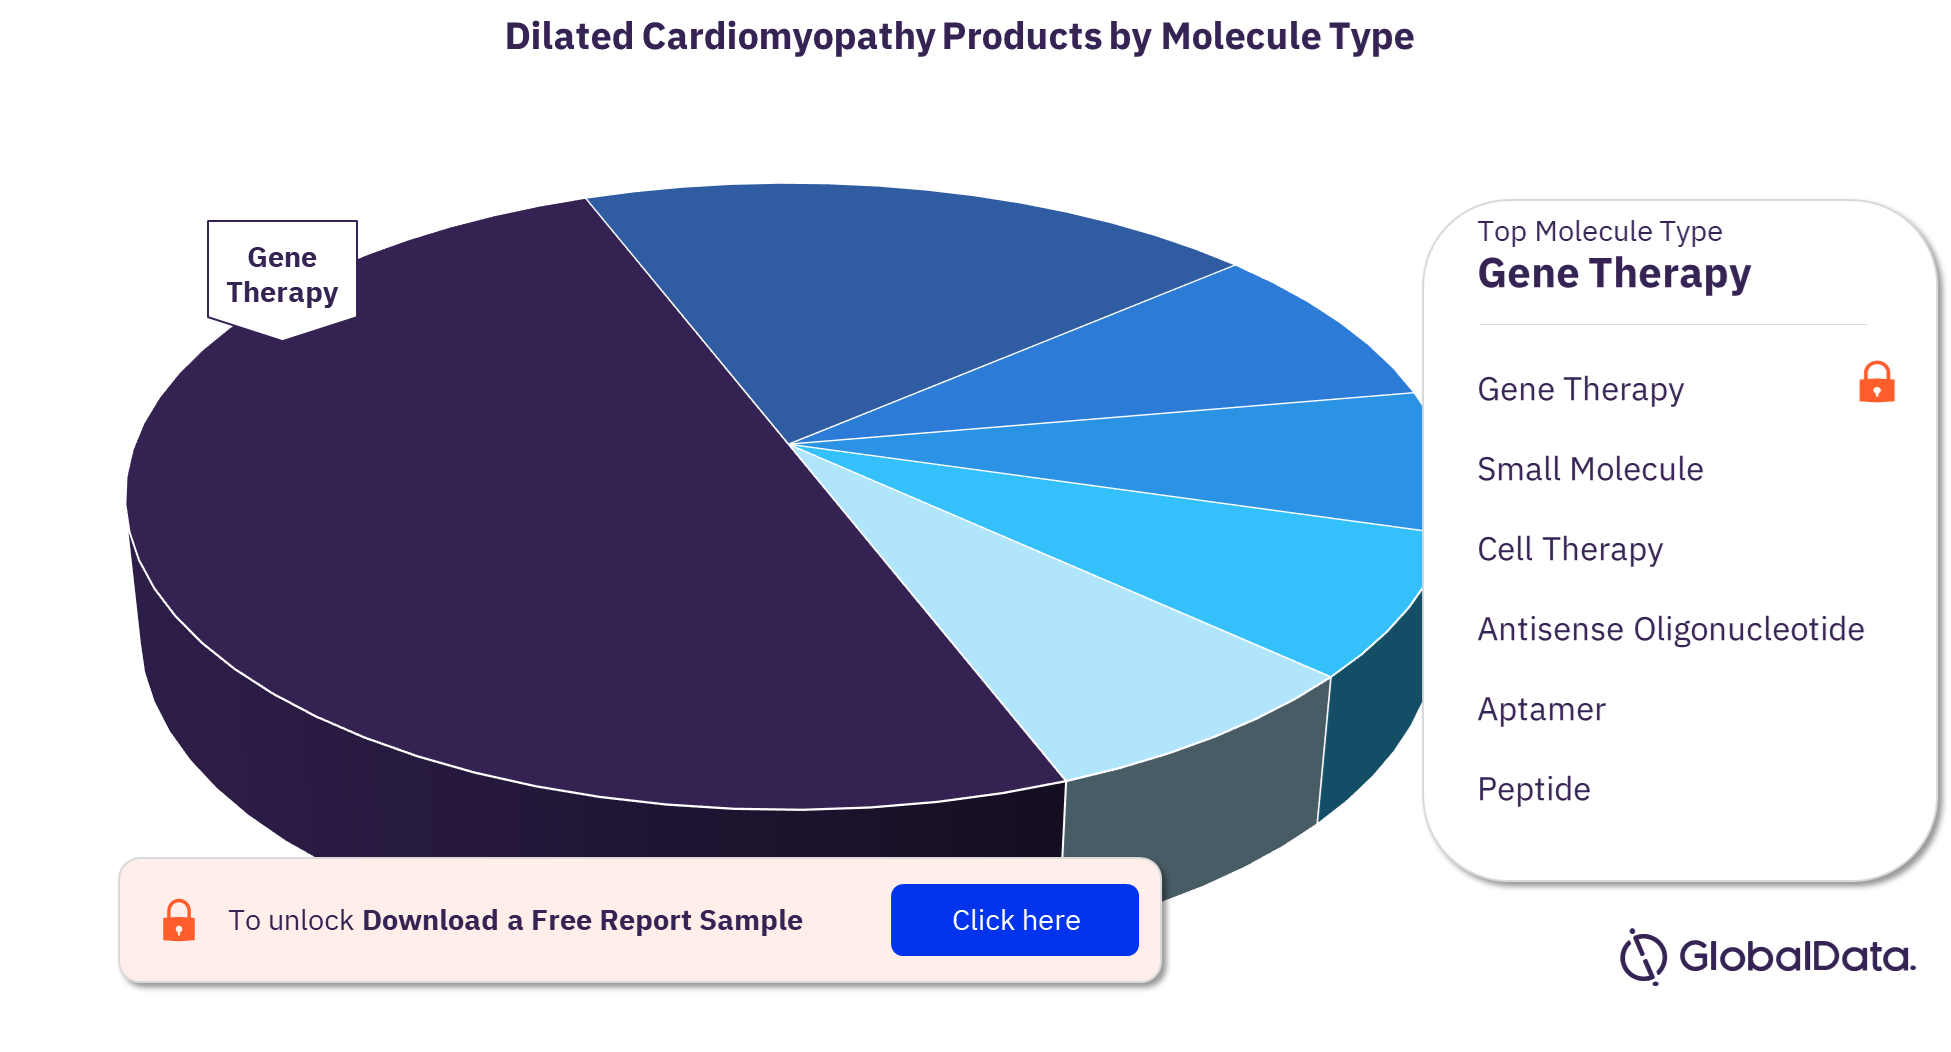 Dilated Cardiomyopathy Pipeline Products by Molecule Type